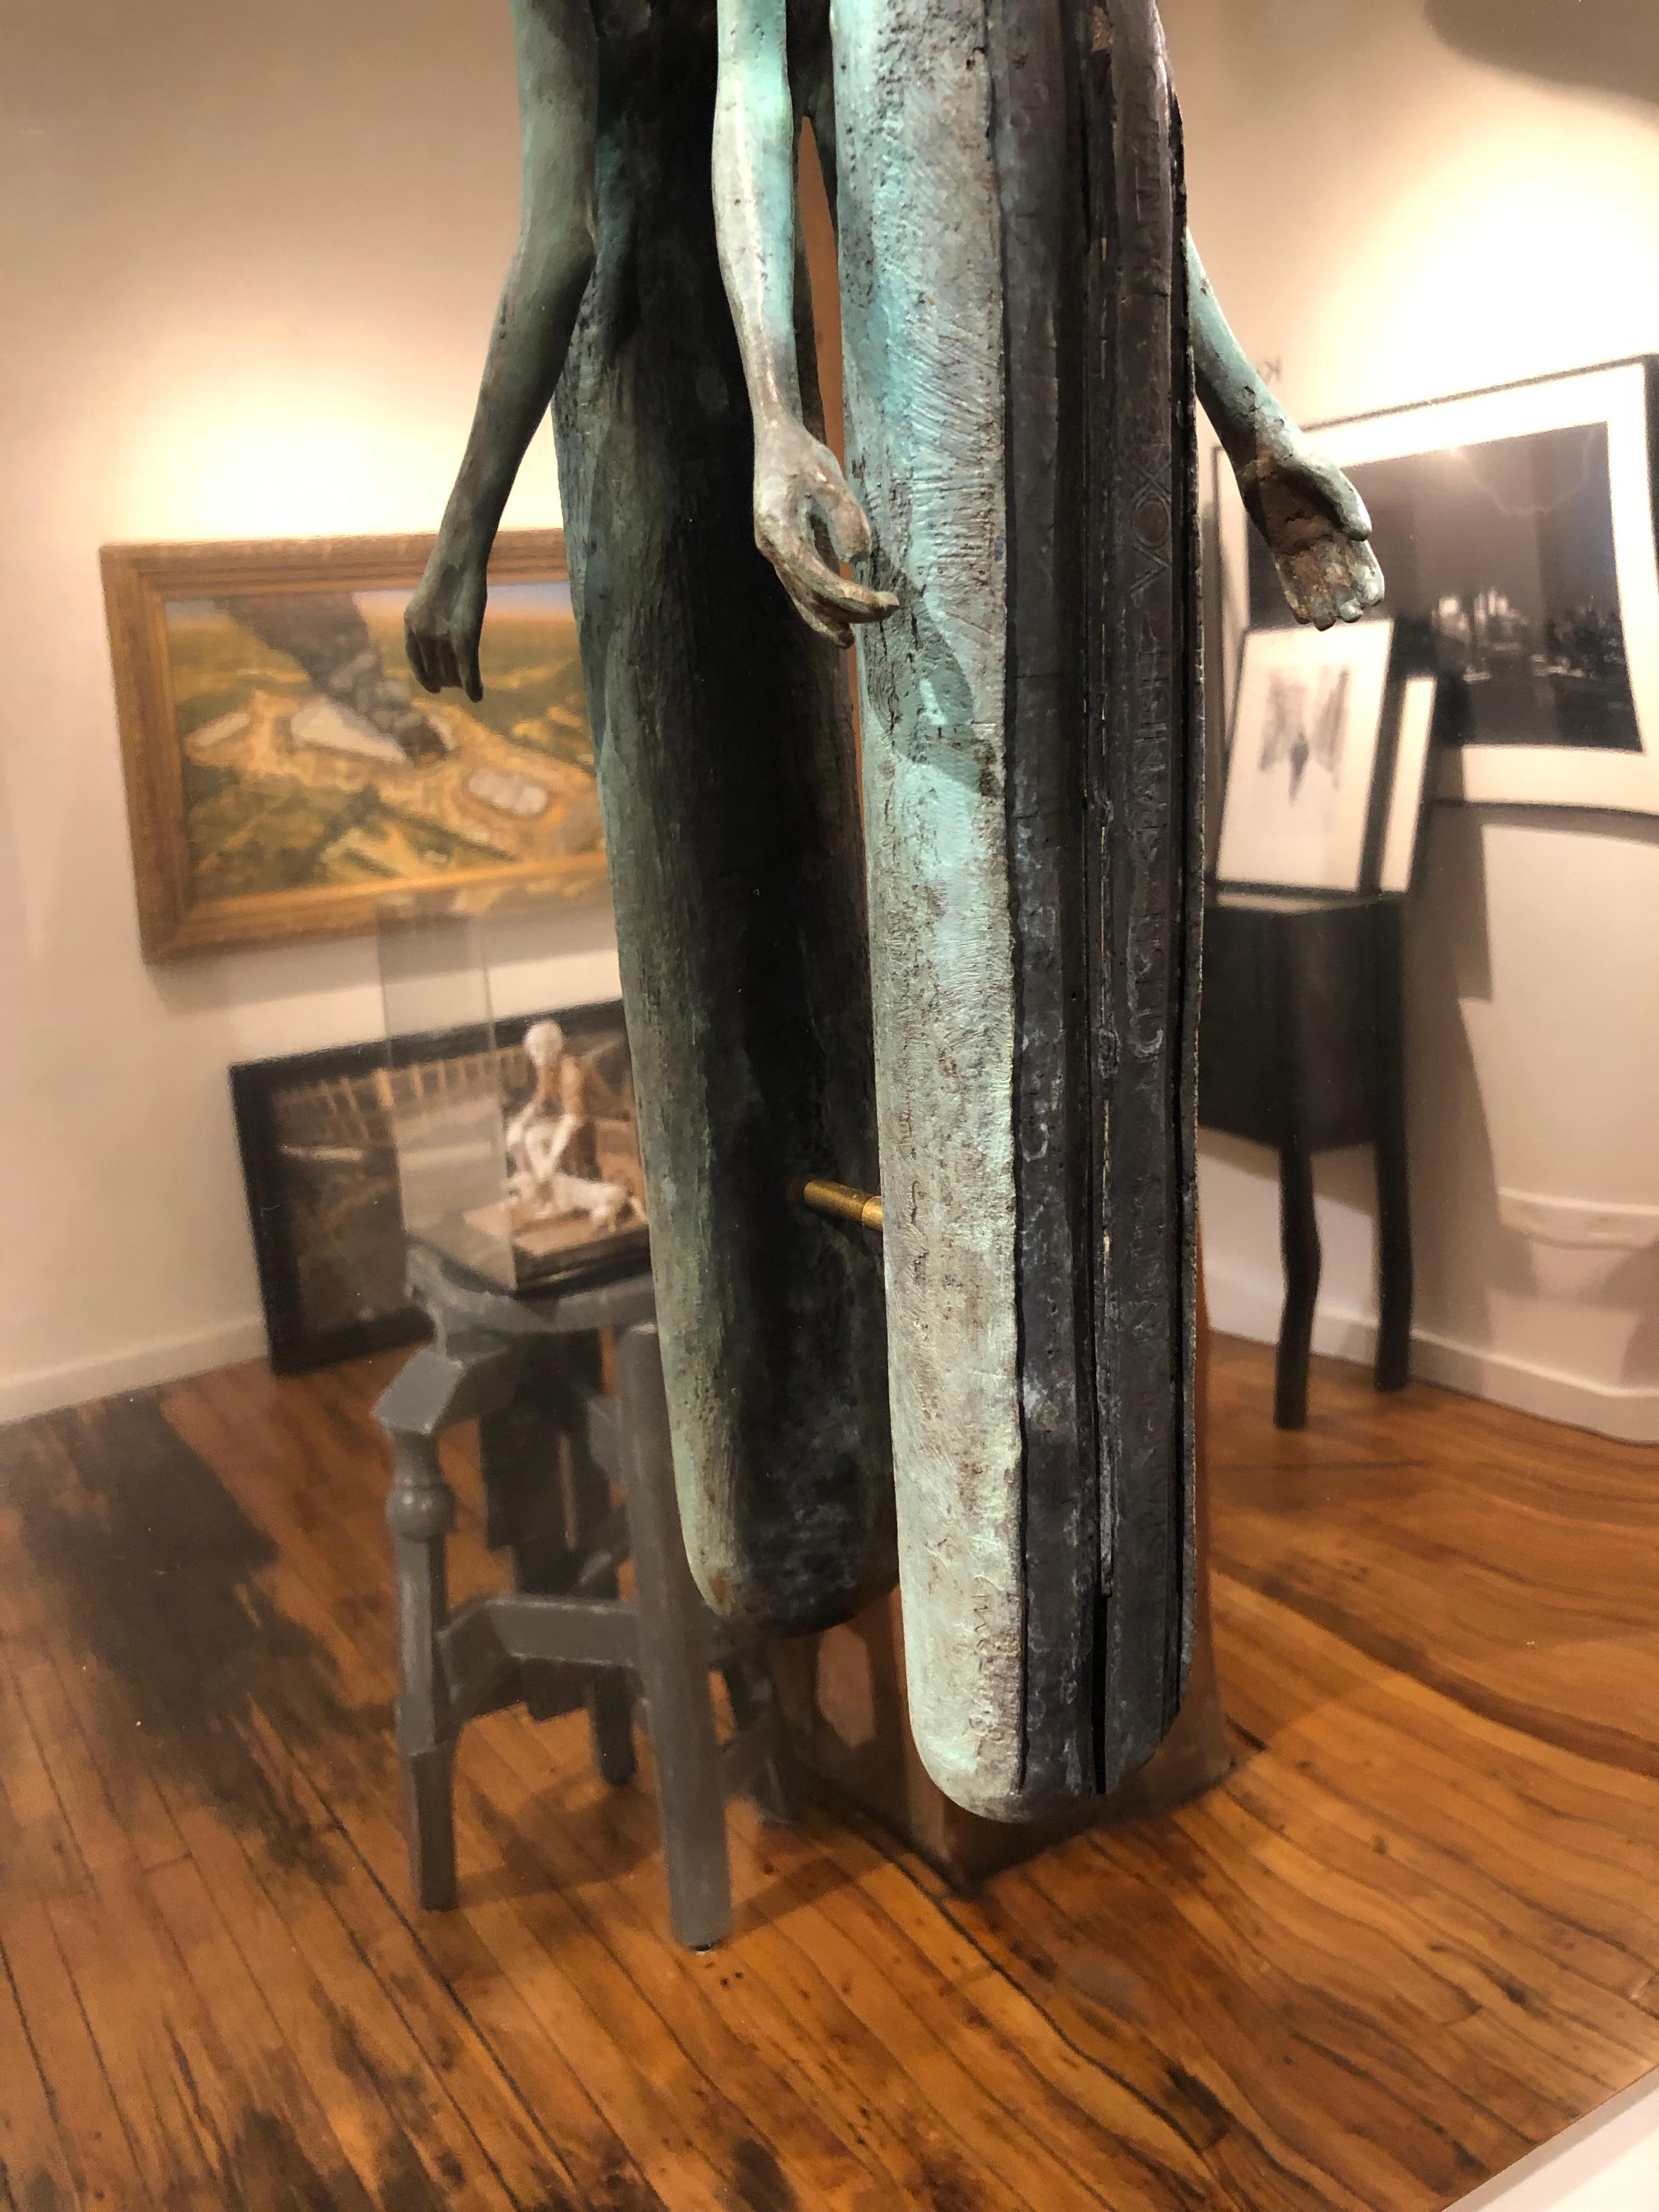 This bronze wall sculpture is mounted on a polished stainless steel surface.  The sculpture appears to float in mid-air.  The the abstracted figure is patinated in green verdigris and brown rust tones.

Jesús Curiá Perez
Library
bronze and stainless